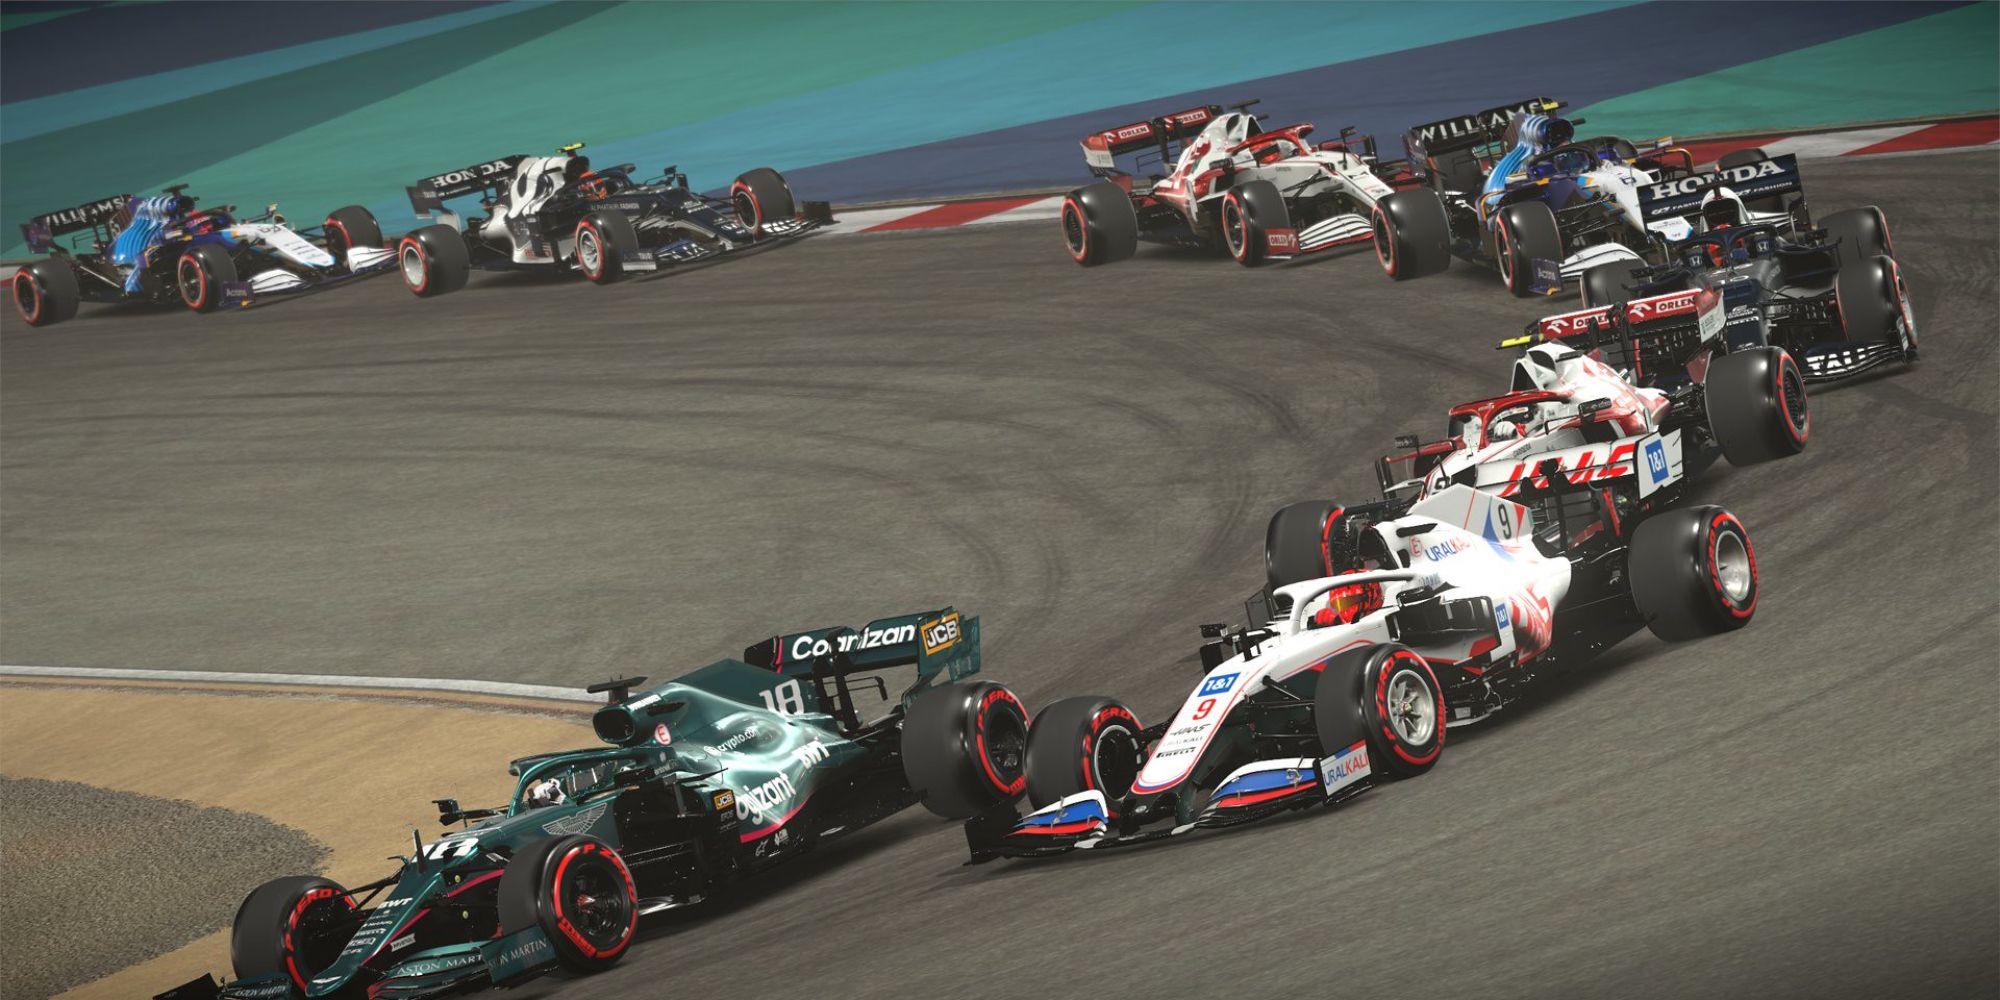 F1 2021 Stroll Mazepin Racing A Queue Of Cars In Bahrain